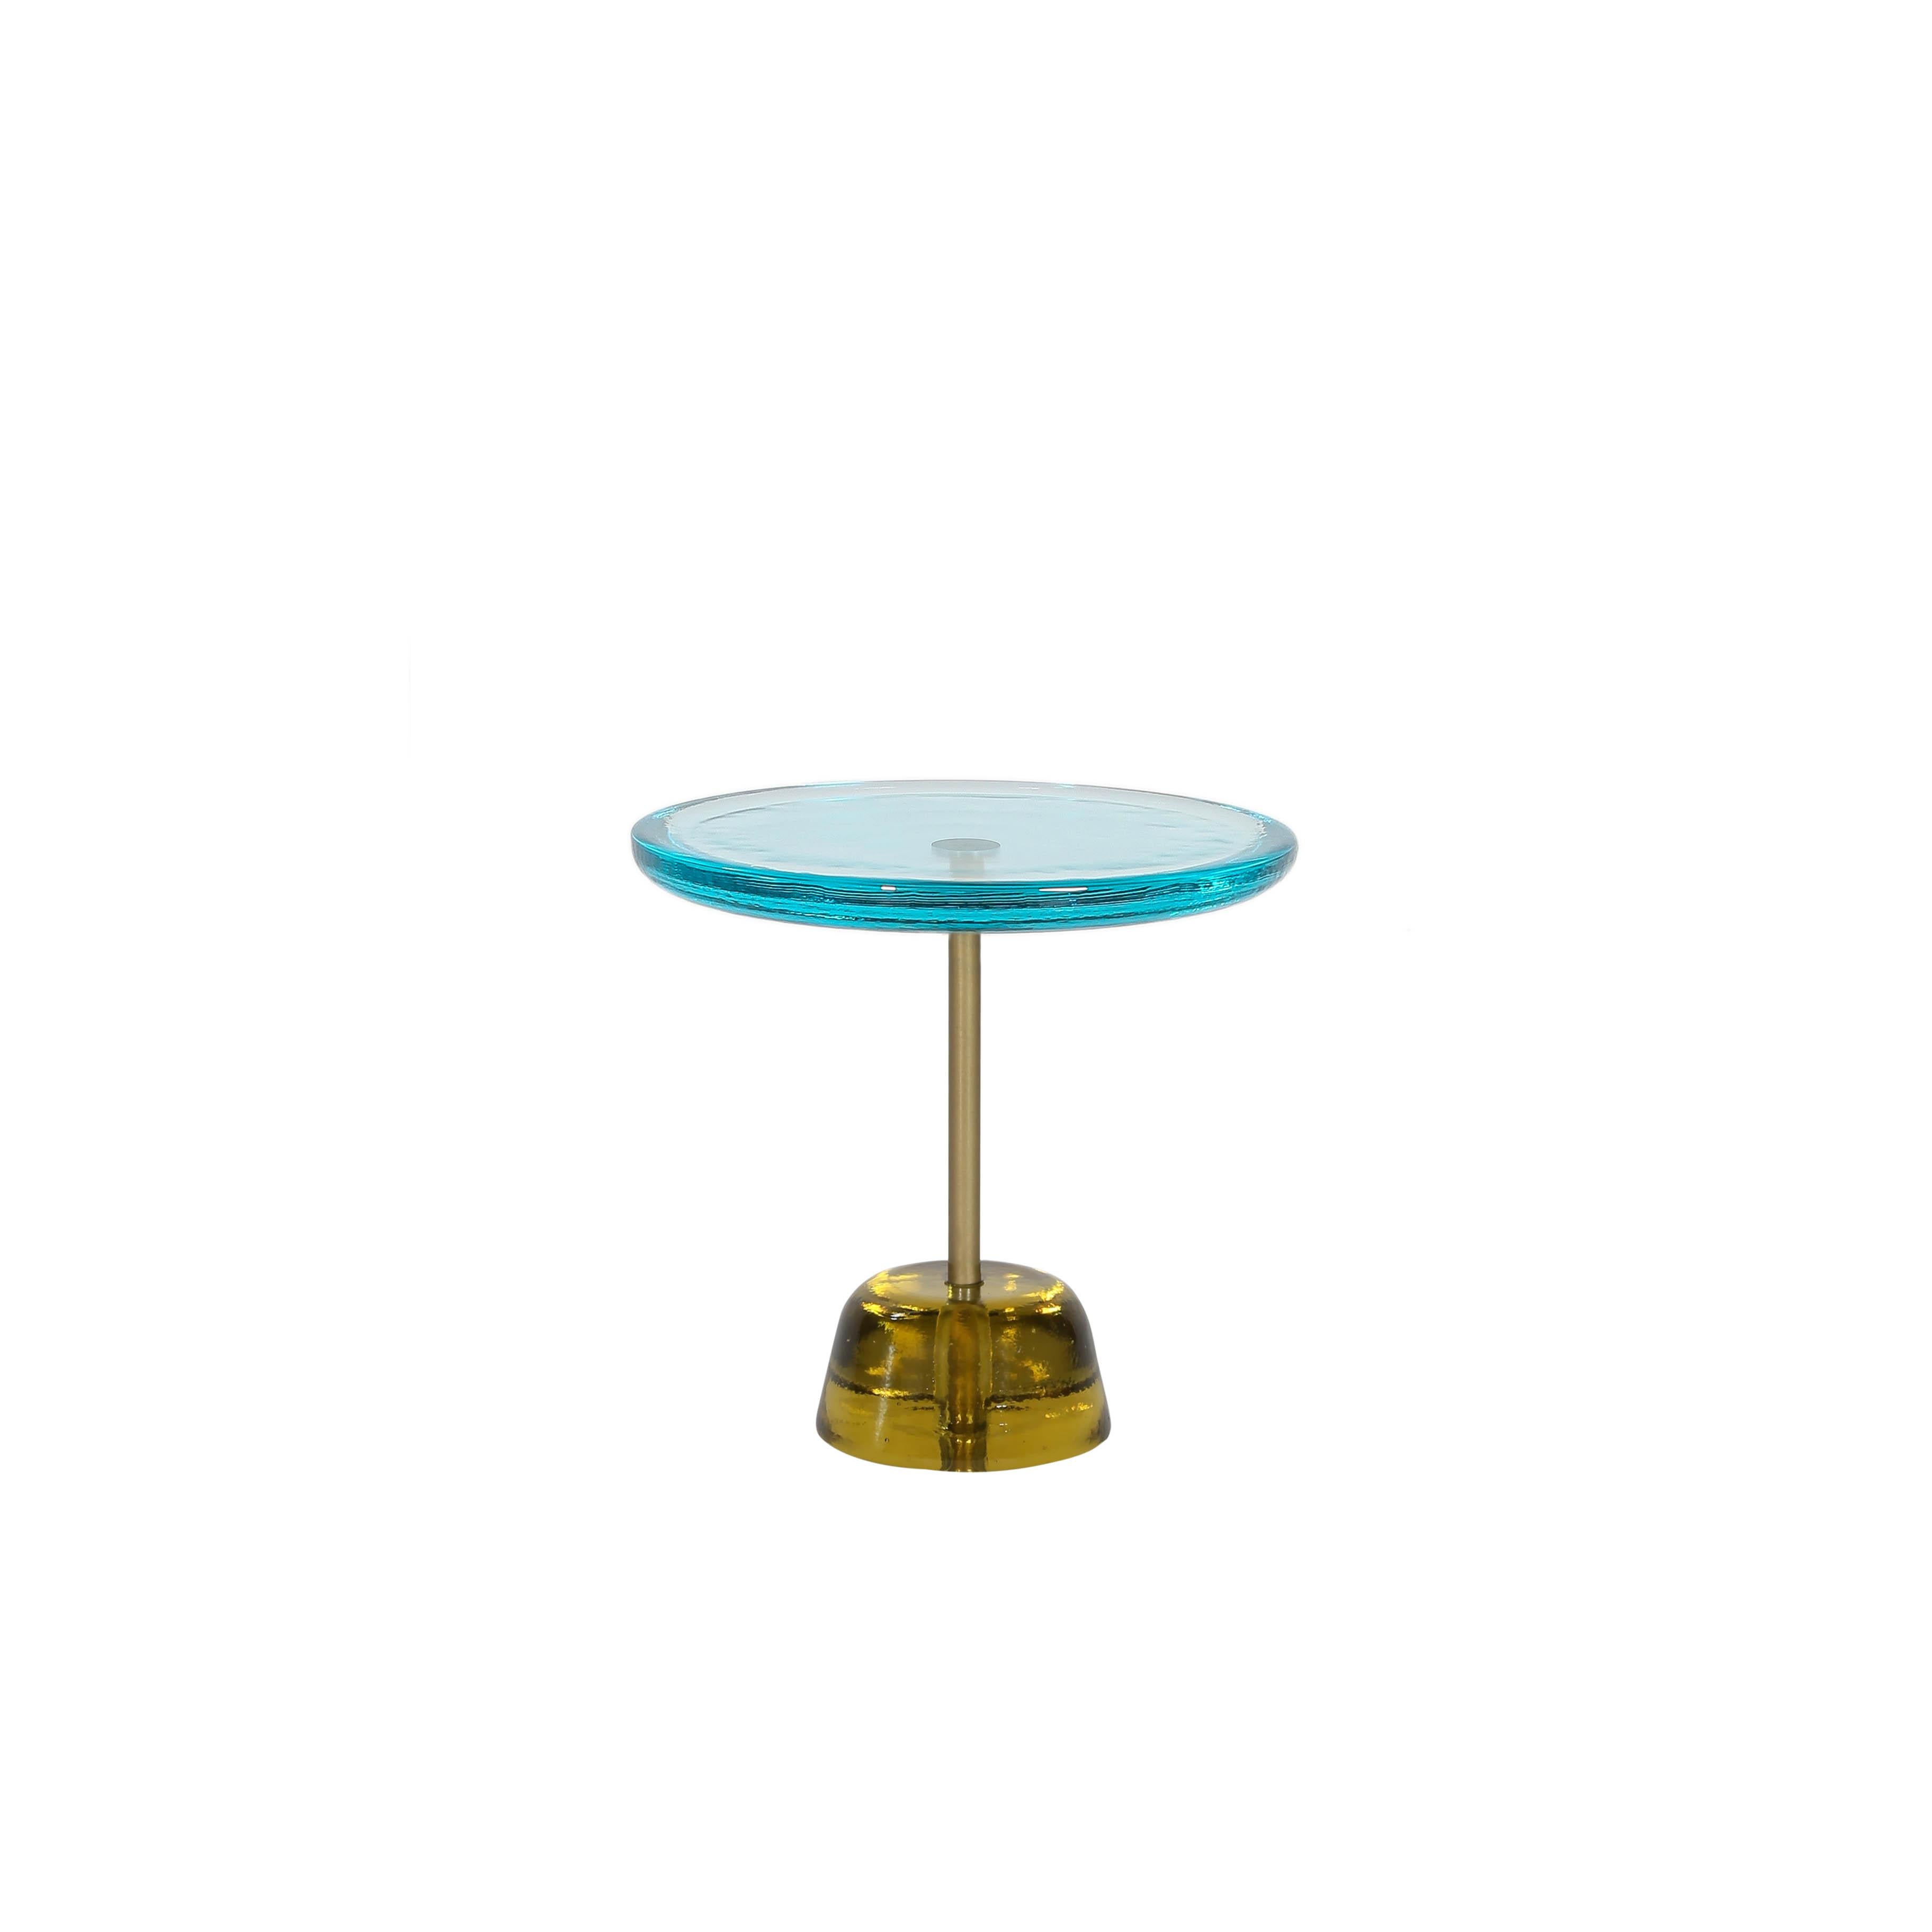 Pina low aqua blue brass side table by Pulpo
Dimensions: D44 x H42 cm
Materials: glass; brass and steel

Also available in different colours.

Sebastian Herkner’s distinctively tall, skinny side table series pina is inspired by the abstract turns